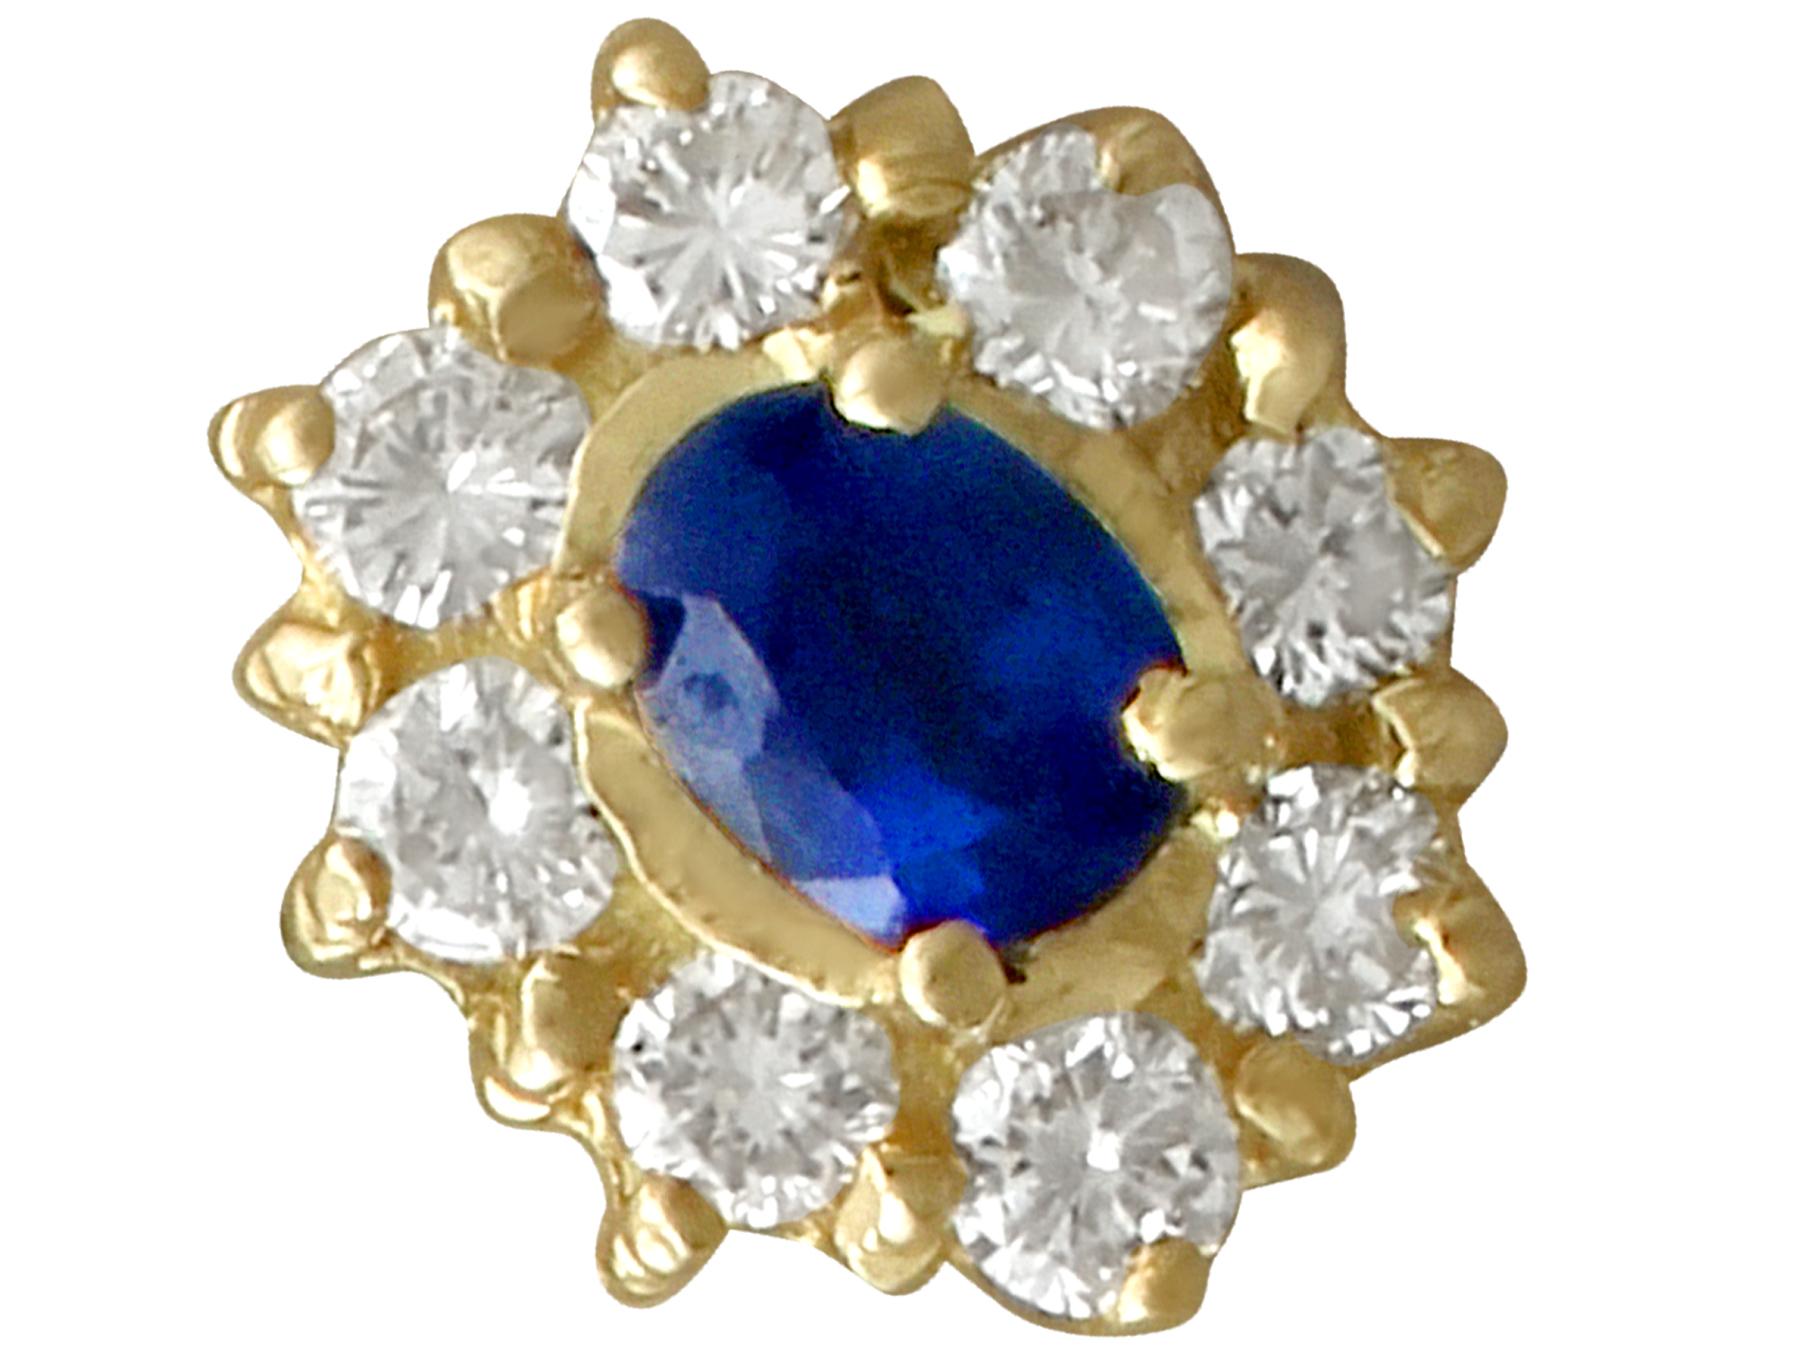 An impressive pair of vintage 0.40 carat blue sapphire and 0.32 carat diamond, 18k yellow gold cluster earrings; part of our diverse gemstone jewelry collections.

These fine and impressive sapphire and diamond cluster earrings have been crafted in